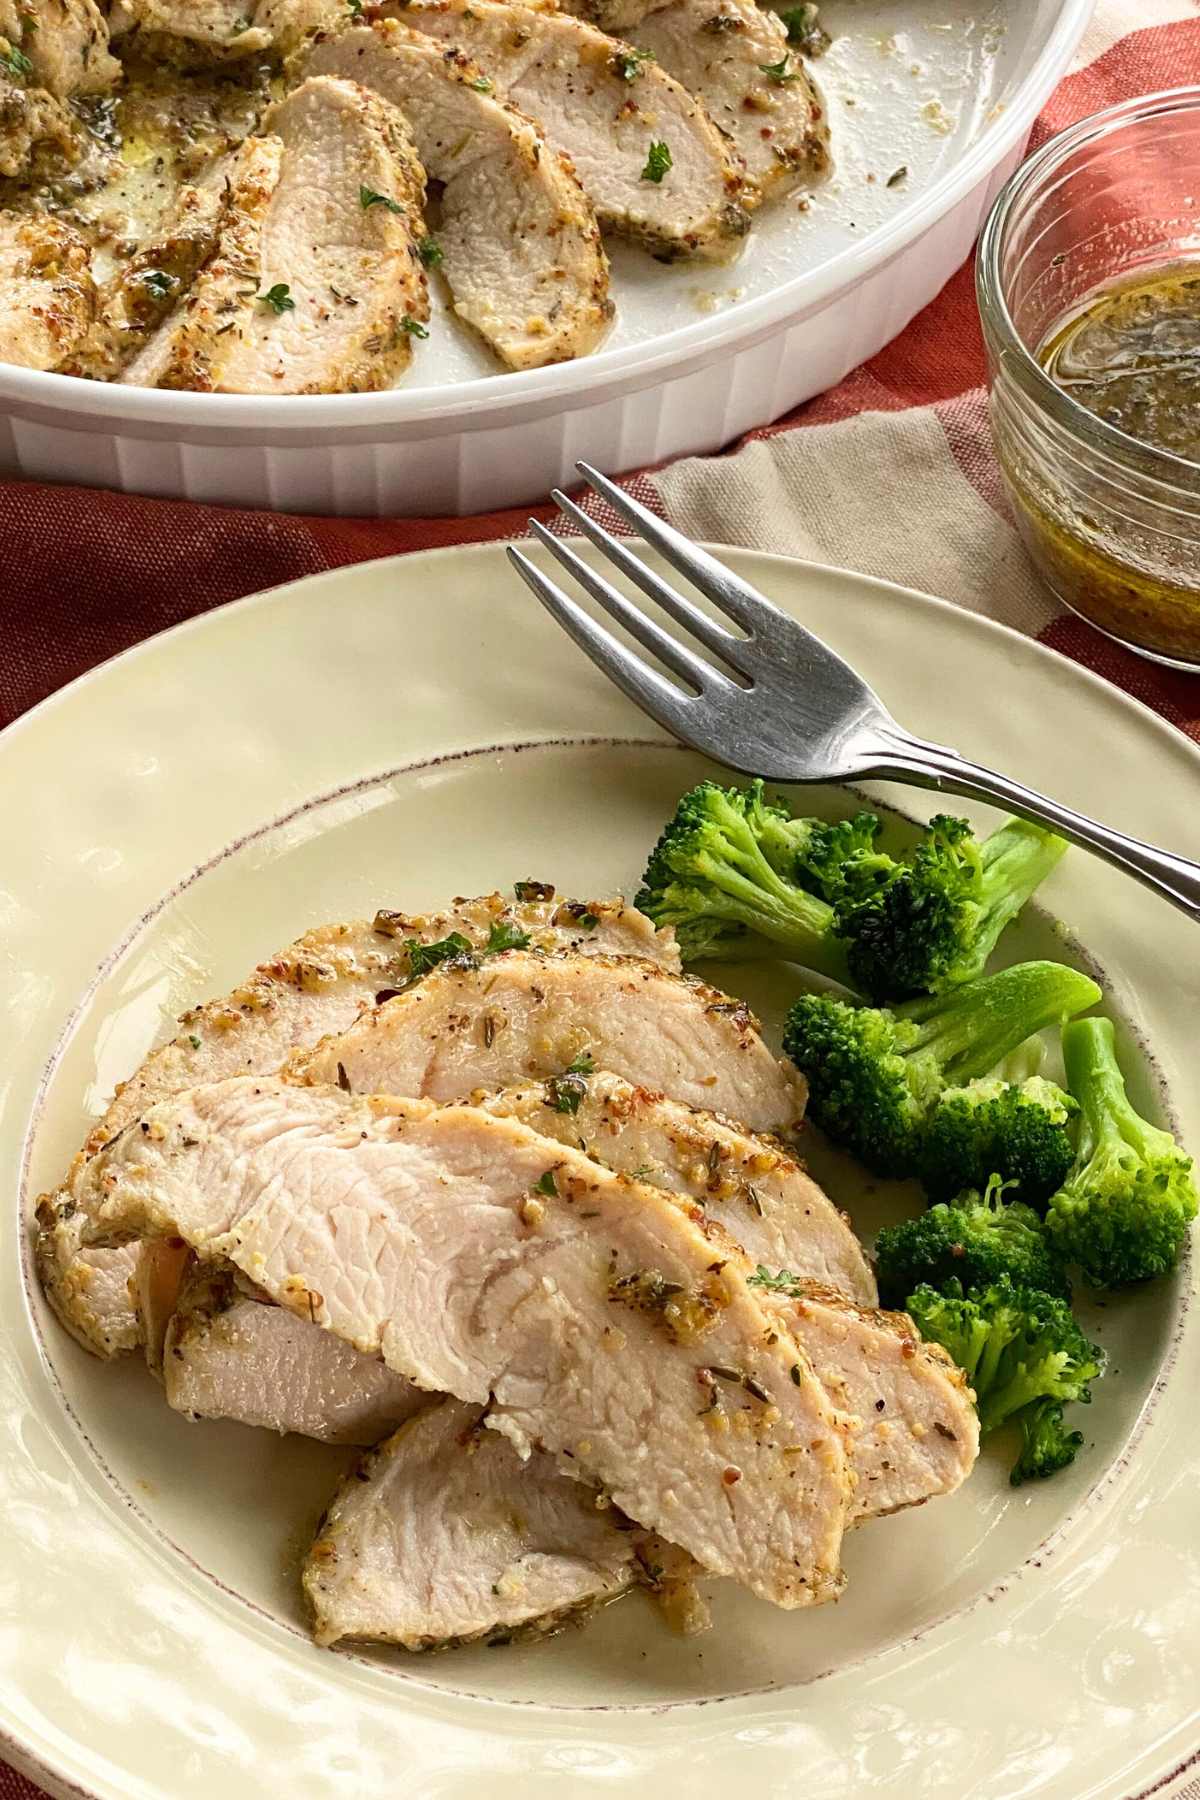 Plate with five slices of baked turkey tenderloin next to broccoli with a platter of more behind it.